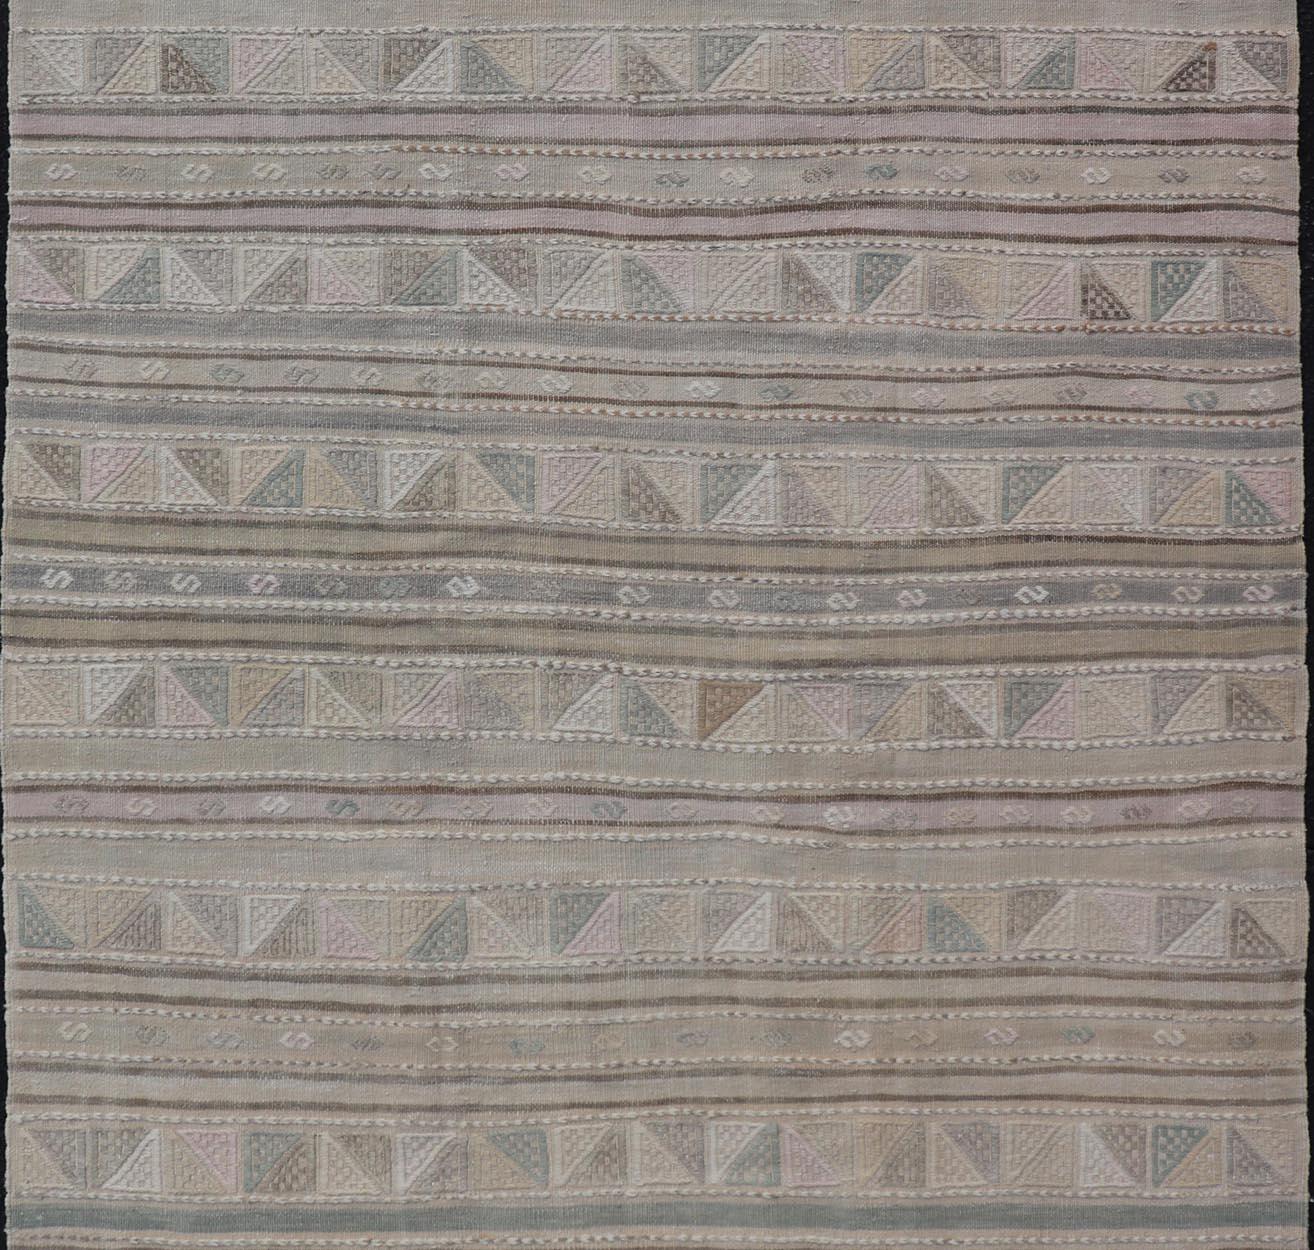 Turkish Flat-Weave with Embroideries Kilim in Taupe, Green, Brown, and Tan For Sale 2